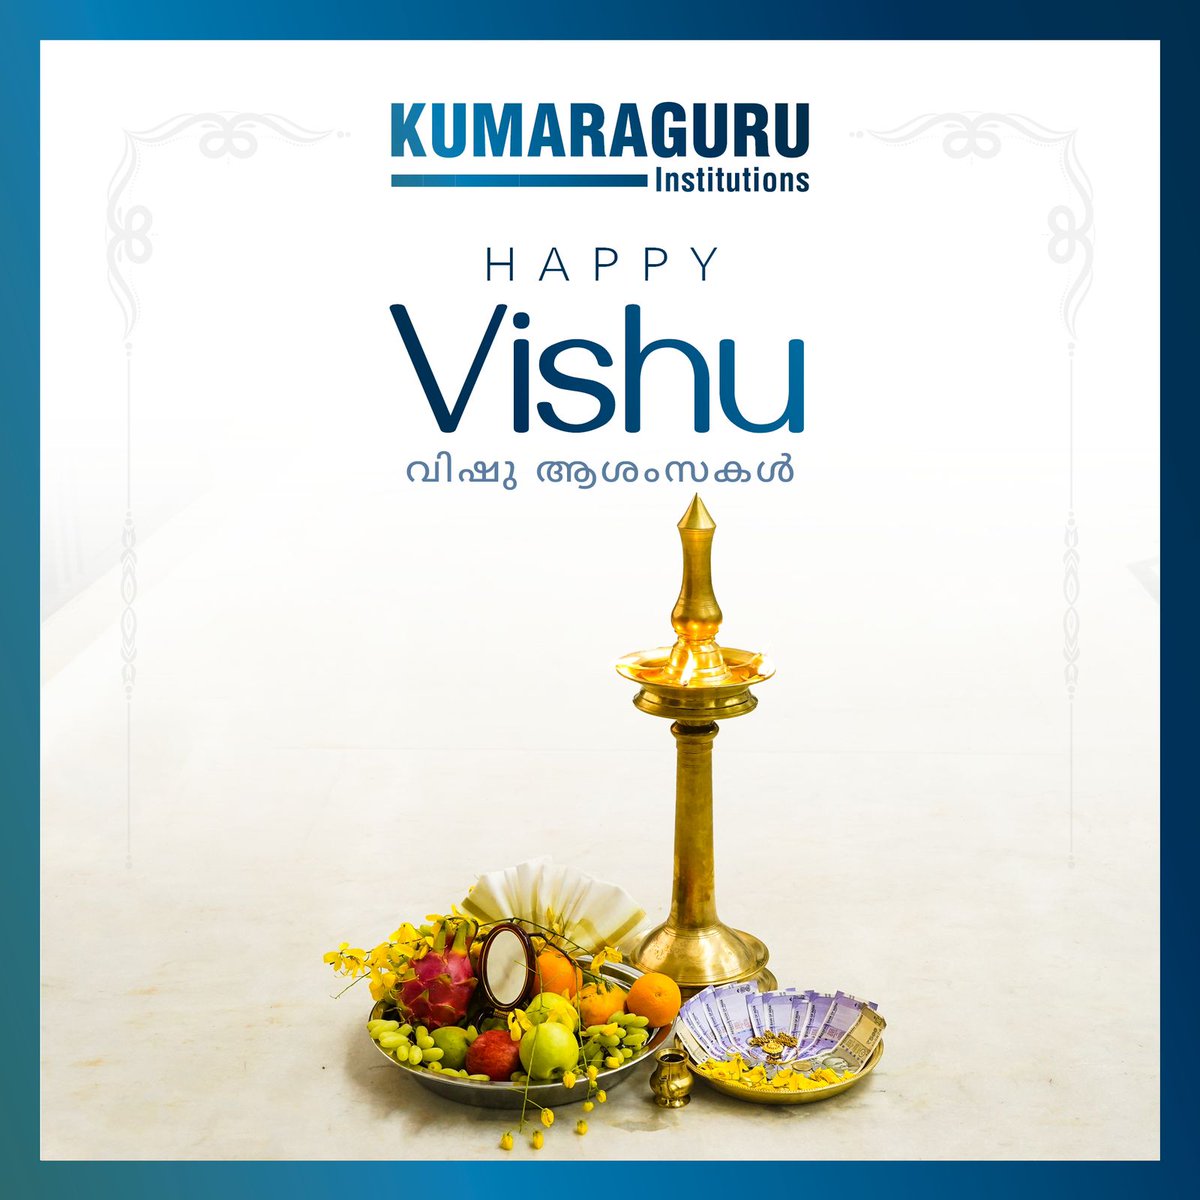 Happy Vishu from Kumaraguru Institutions! 

May this New Year bring abundant happiness, prosperity, & success to you and your loved ones. 

May your year ahead be as bright as a Vishu morning!
#NewYear #HappyVishu #KumaraguruInstitutions #VishuCelebration #vishu2024